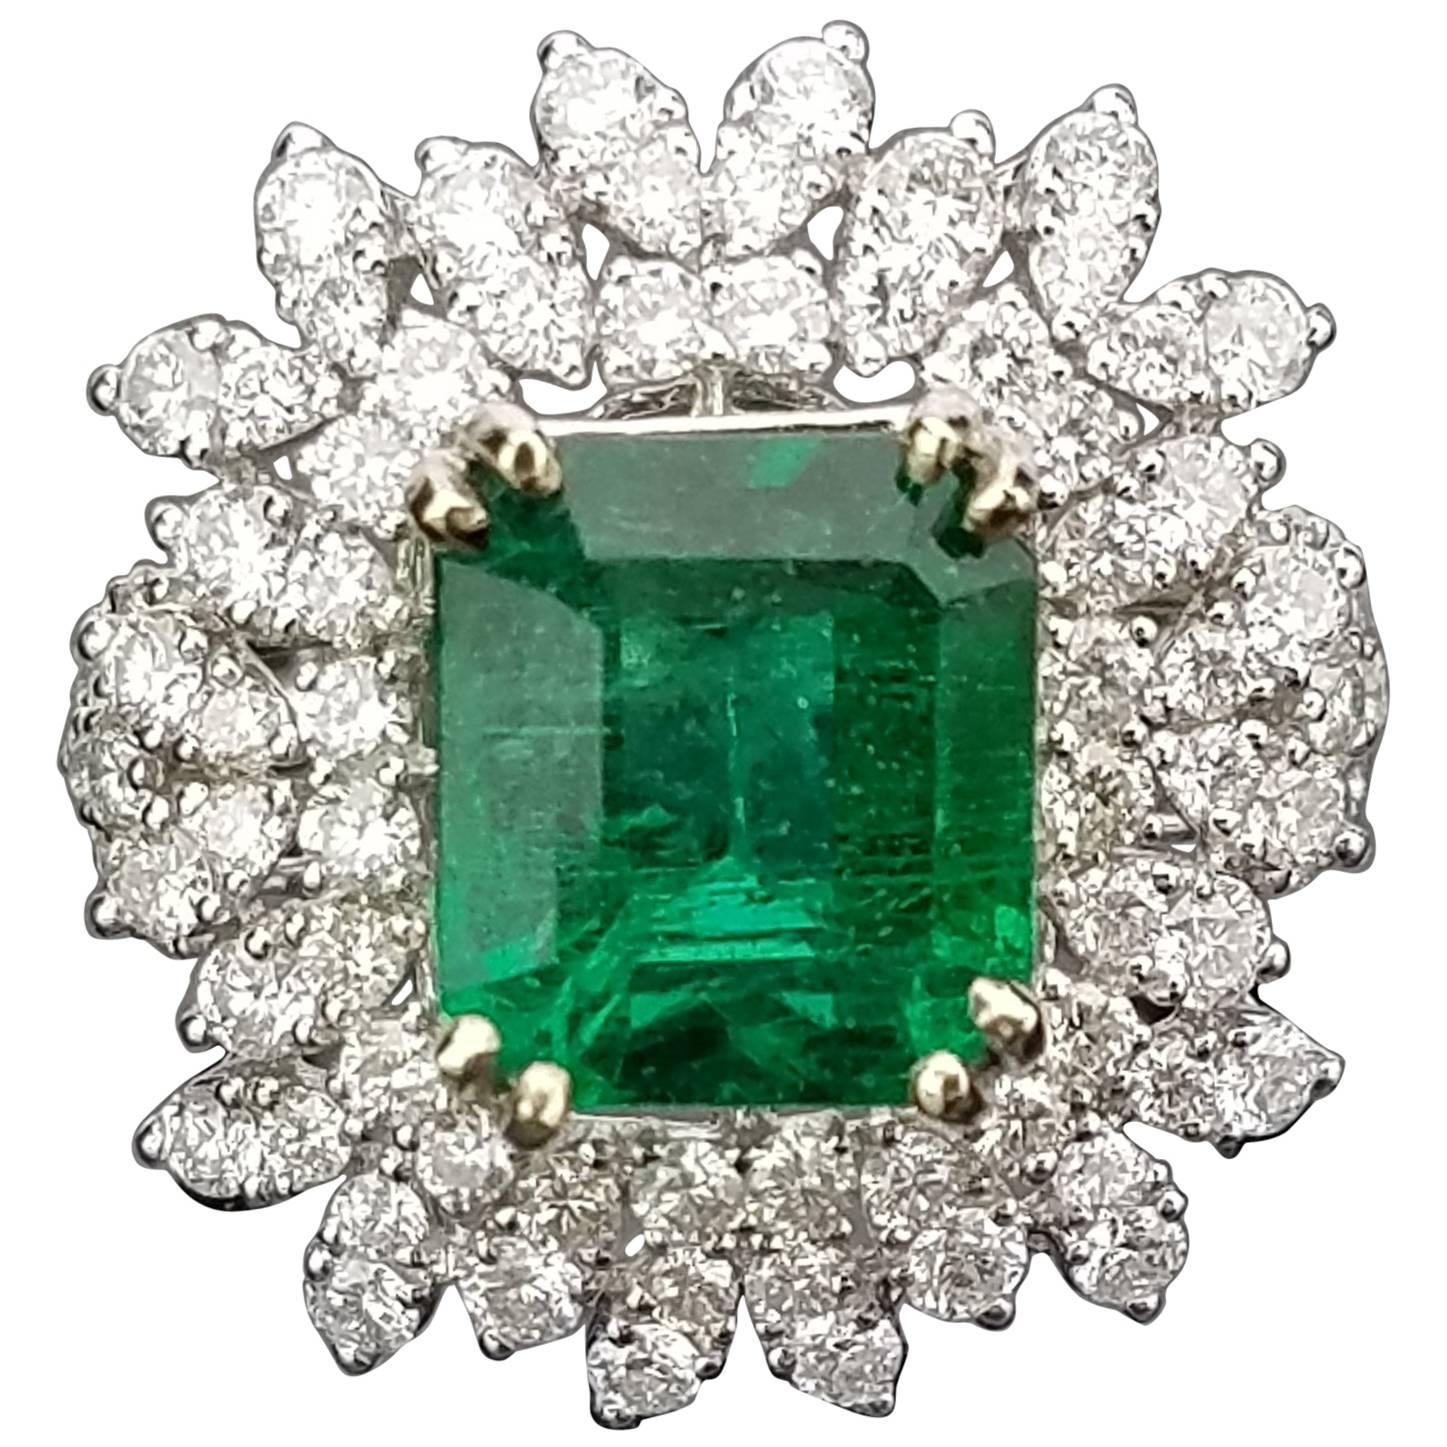 White Gold Zambian Emerald Ring with Diamond Cocktail Ring